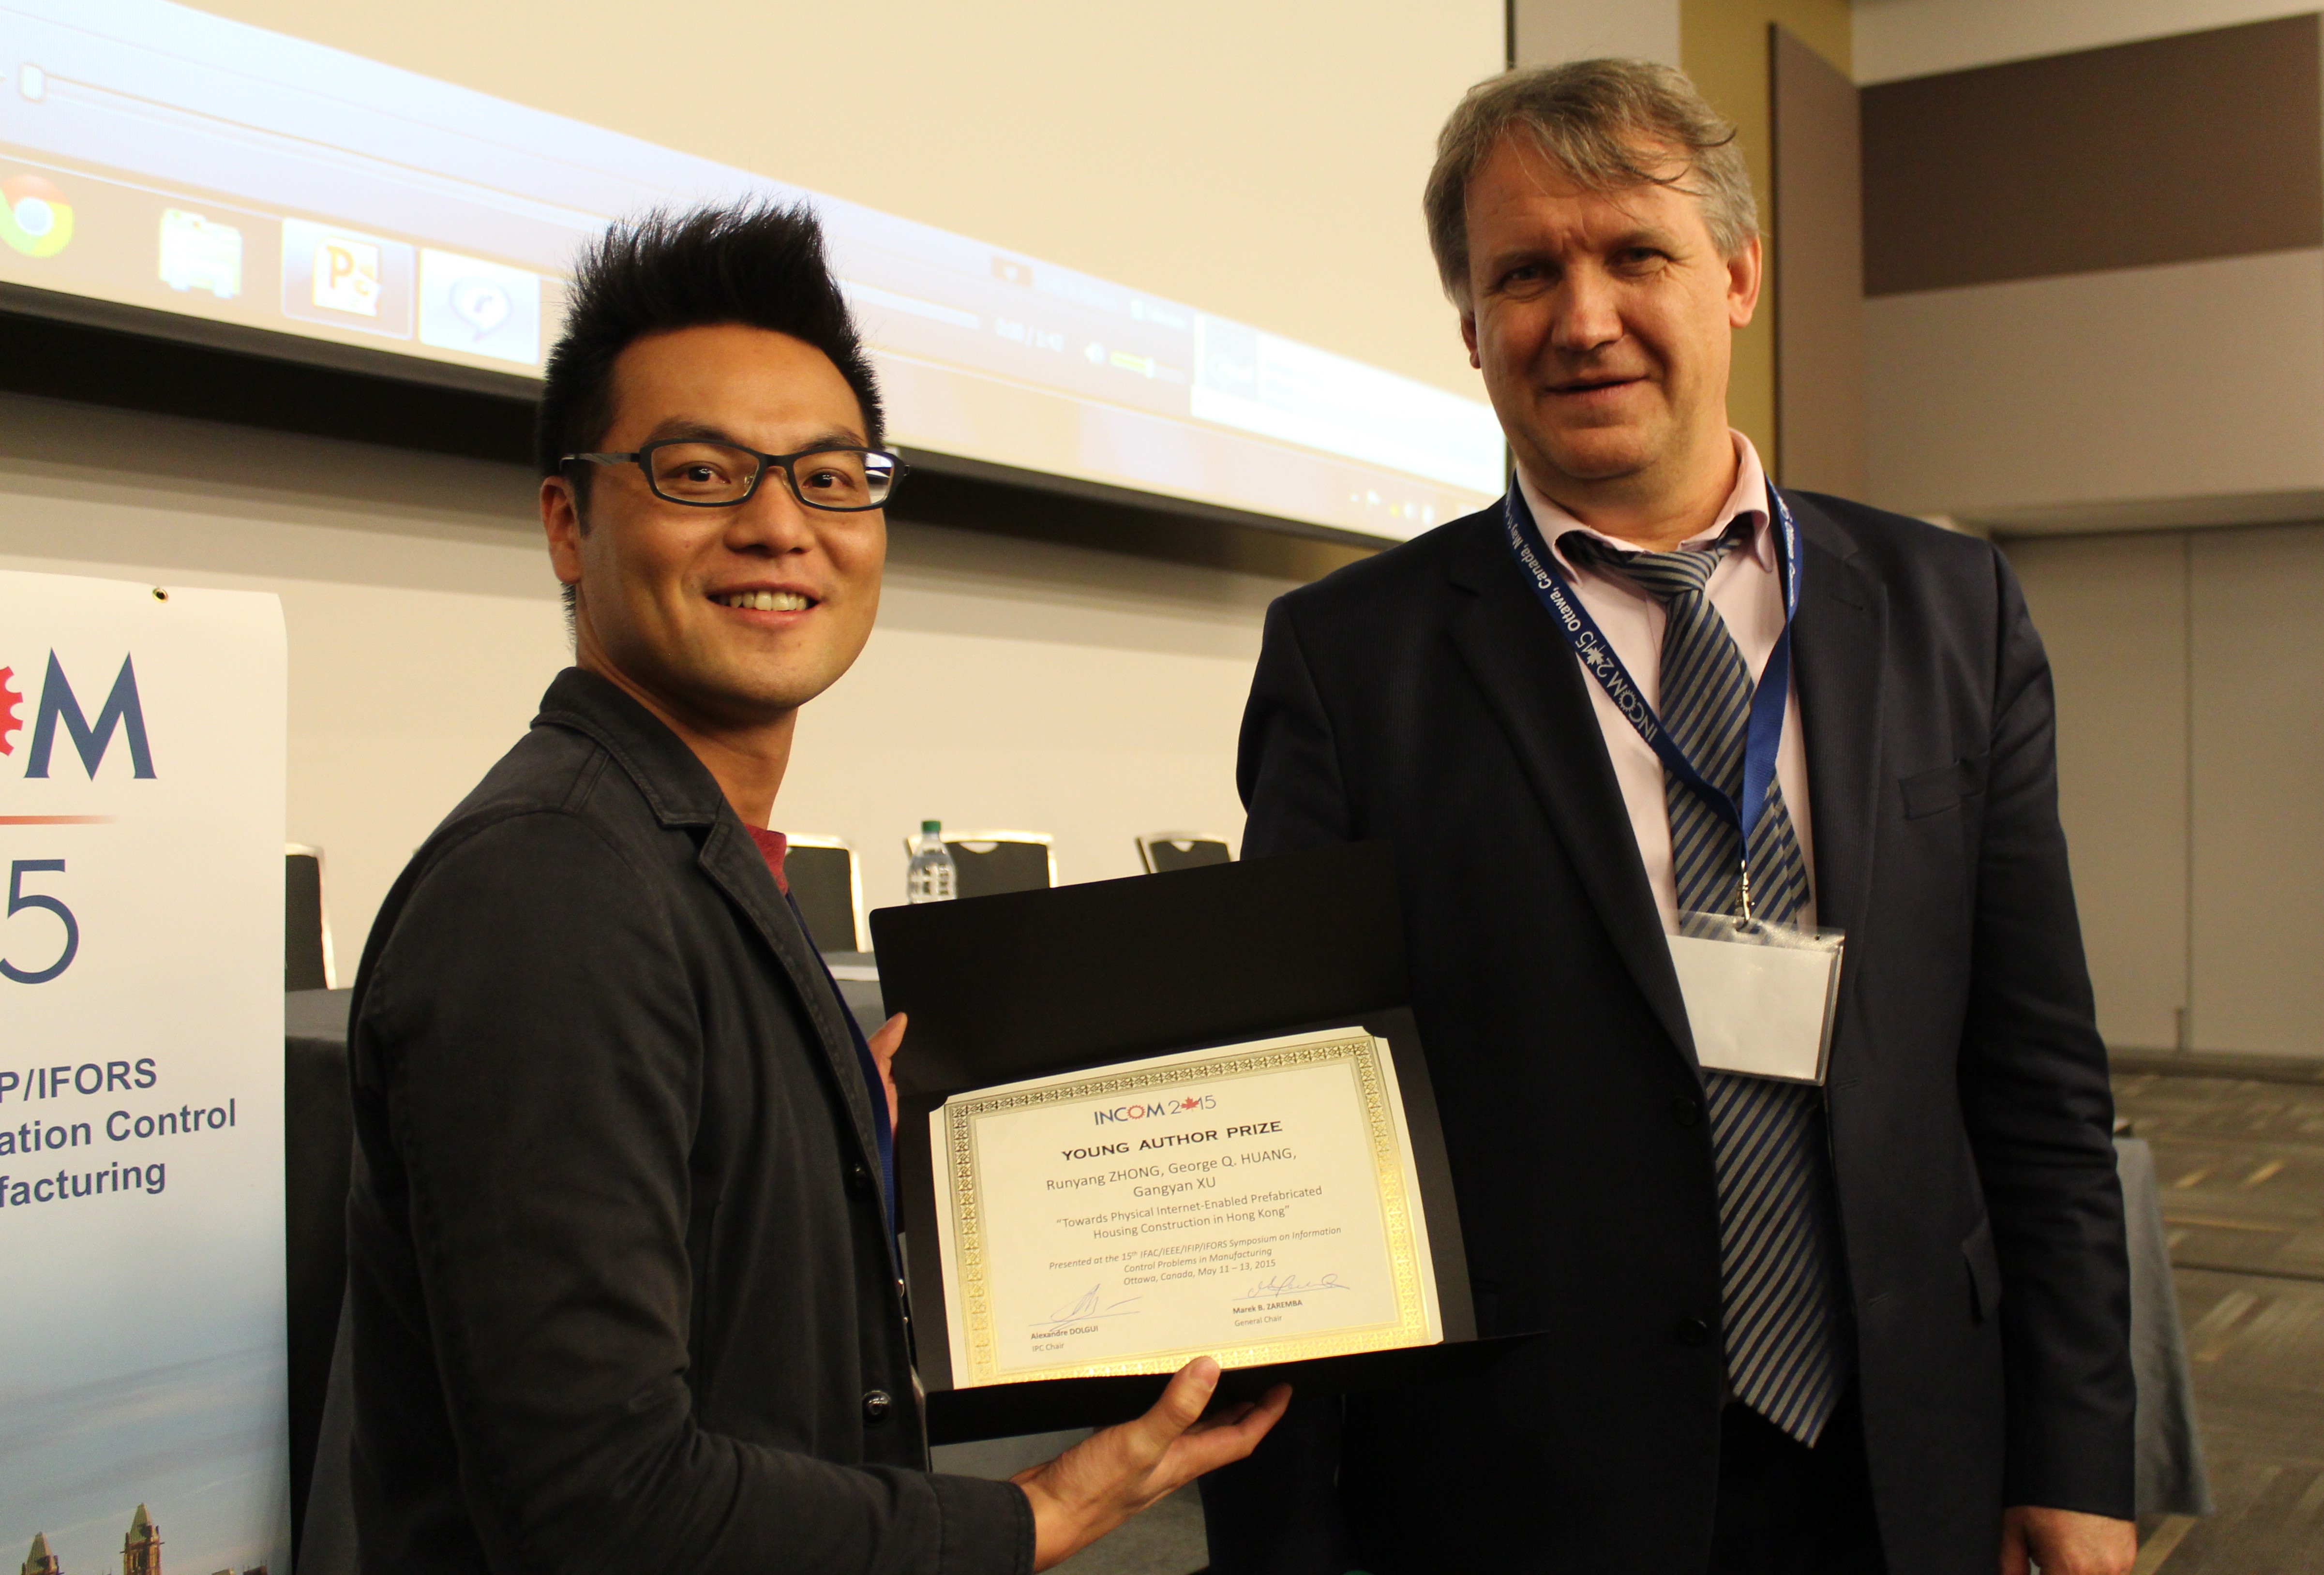 Dr Zhong (left) won the Young Author Prize at the 15th IFAC Symposium on Information Control in Manufacturing (INCOM 2015)